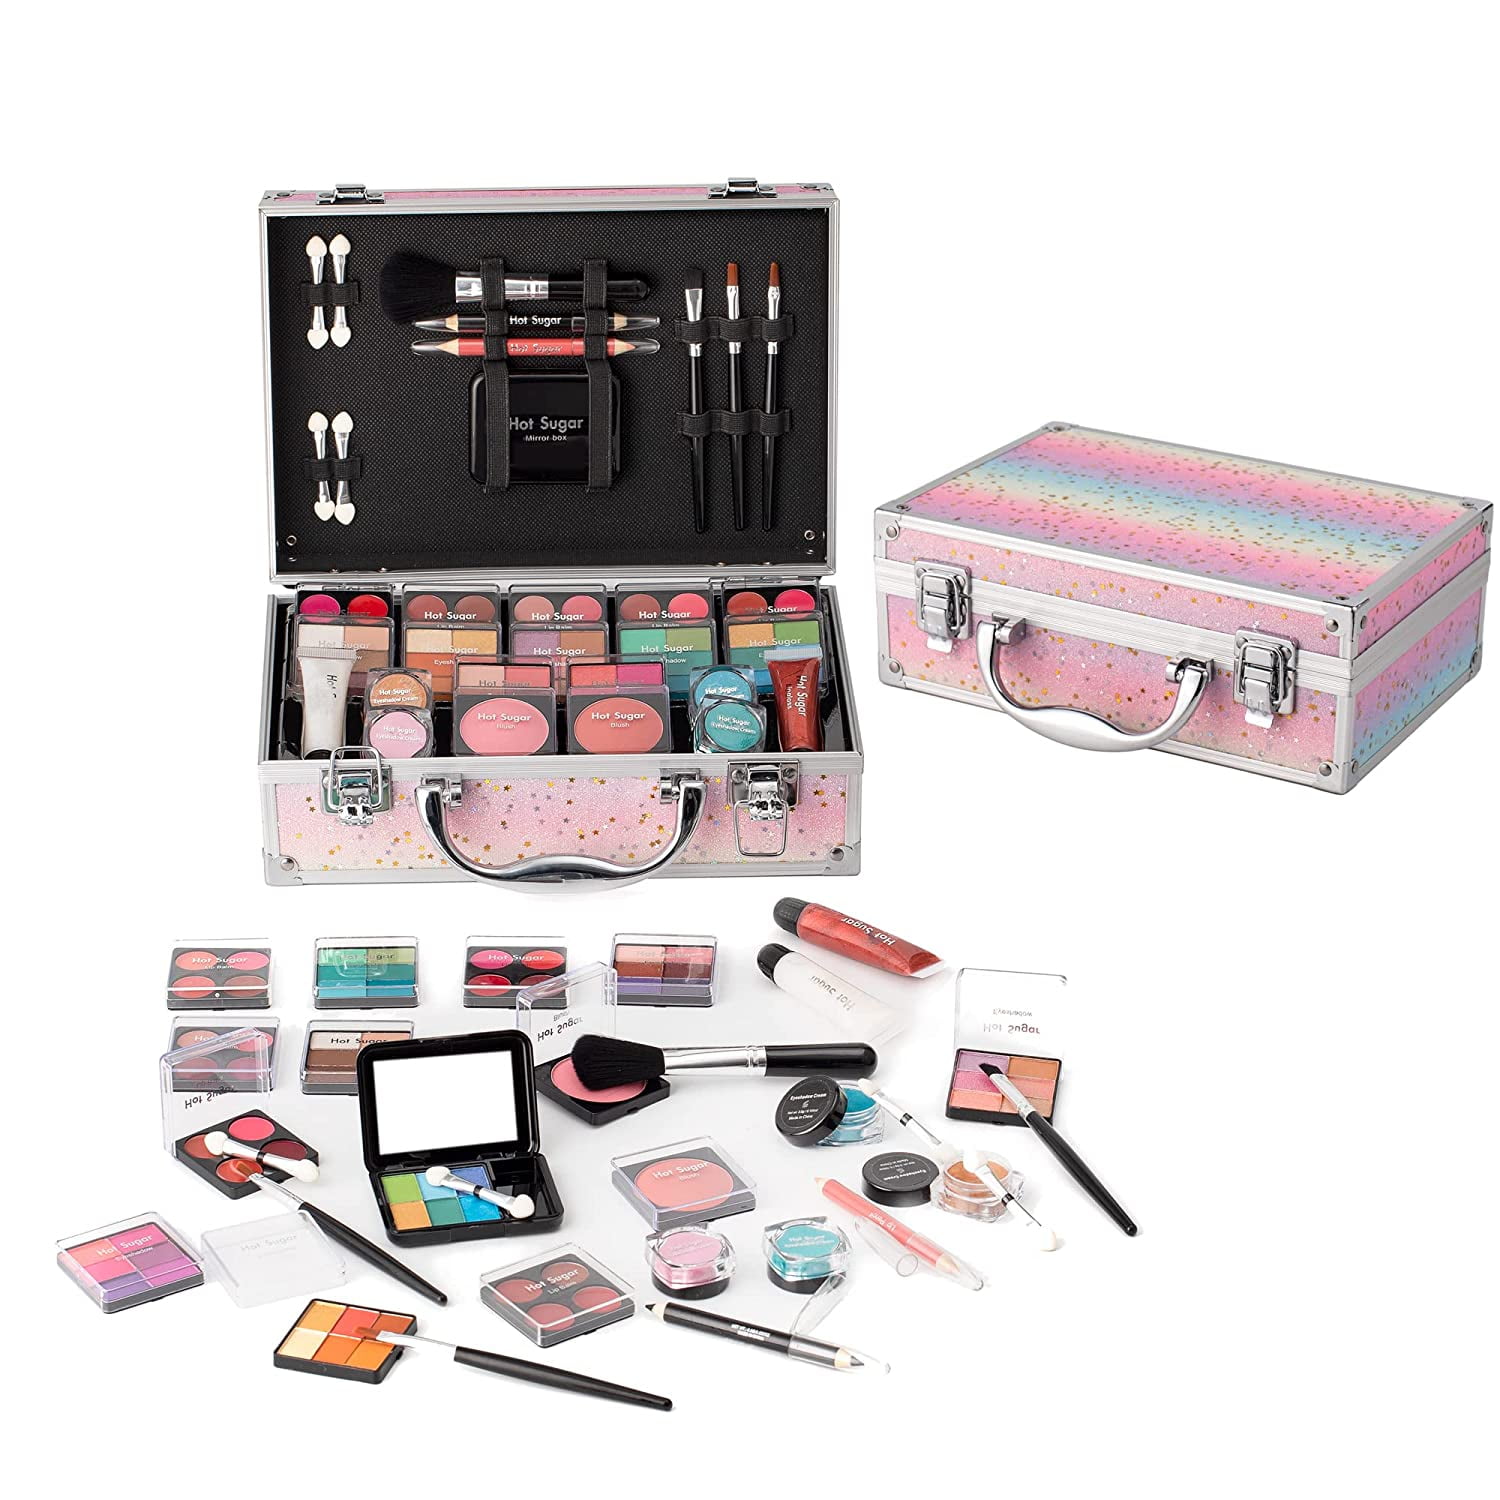 Hot Sugar Makeup Kit for Girls 10-12, All-in-One Kids Makeup Set for Teens,  Starter Cosmetic Set for Women with Essential Products - Includes Tools